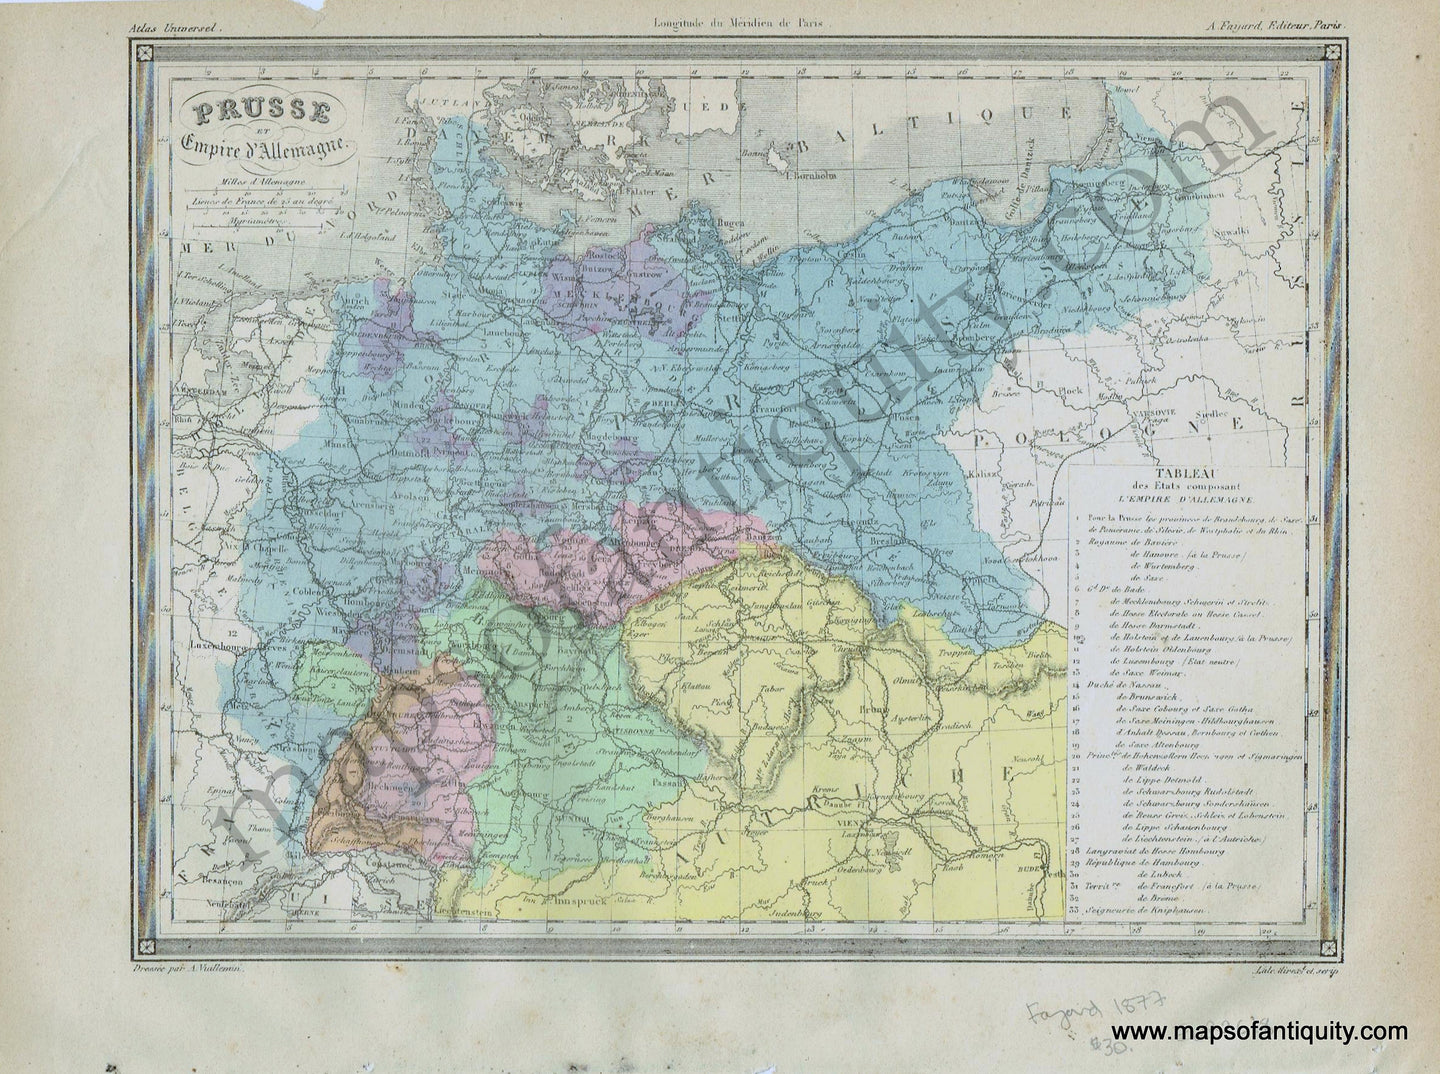 Antique-Printed-Color-Map-Europe-Prusse-et-Empire-d'Allemagne---Prussia-and-the-German-Empire-1877-Fayard-Prussia-1800s-19th-century-Maps-of-Antiquity